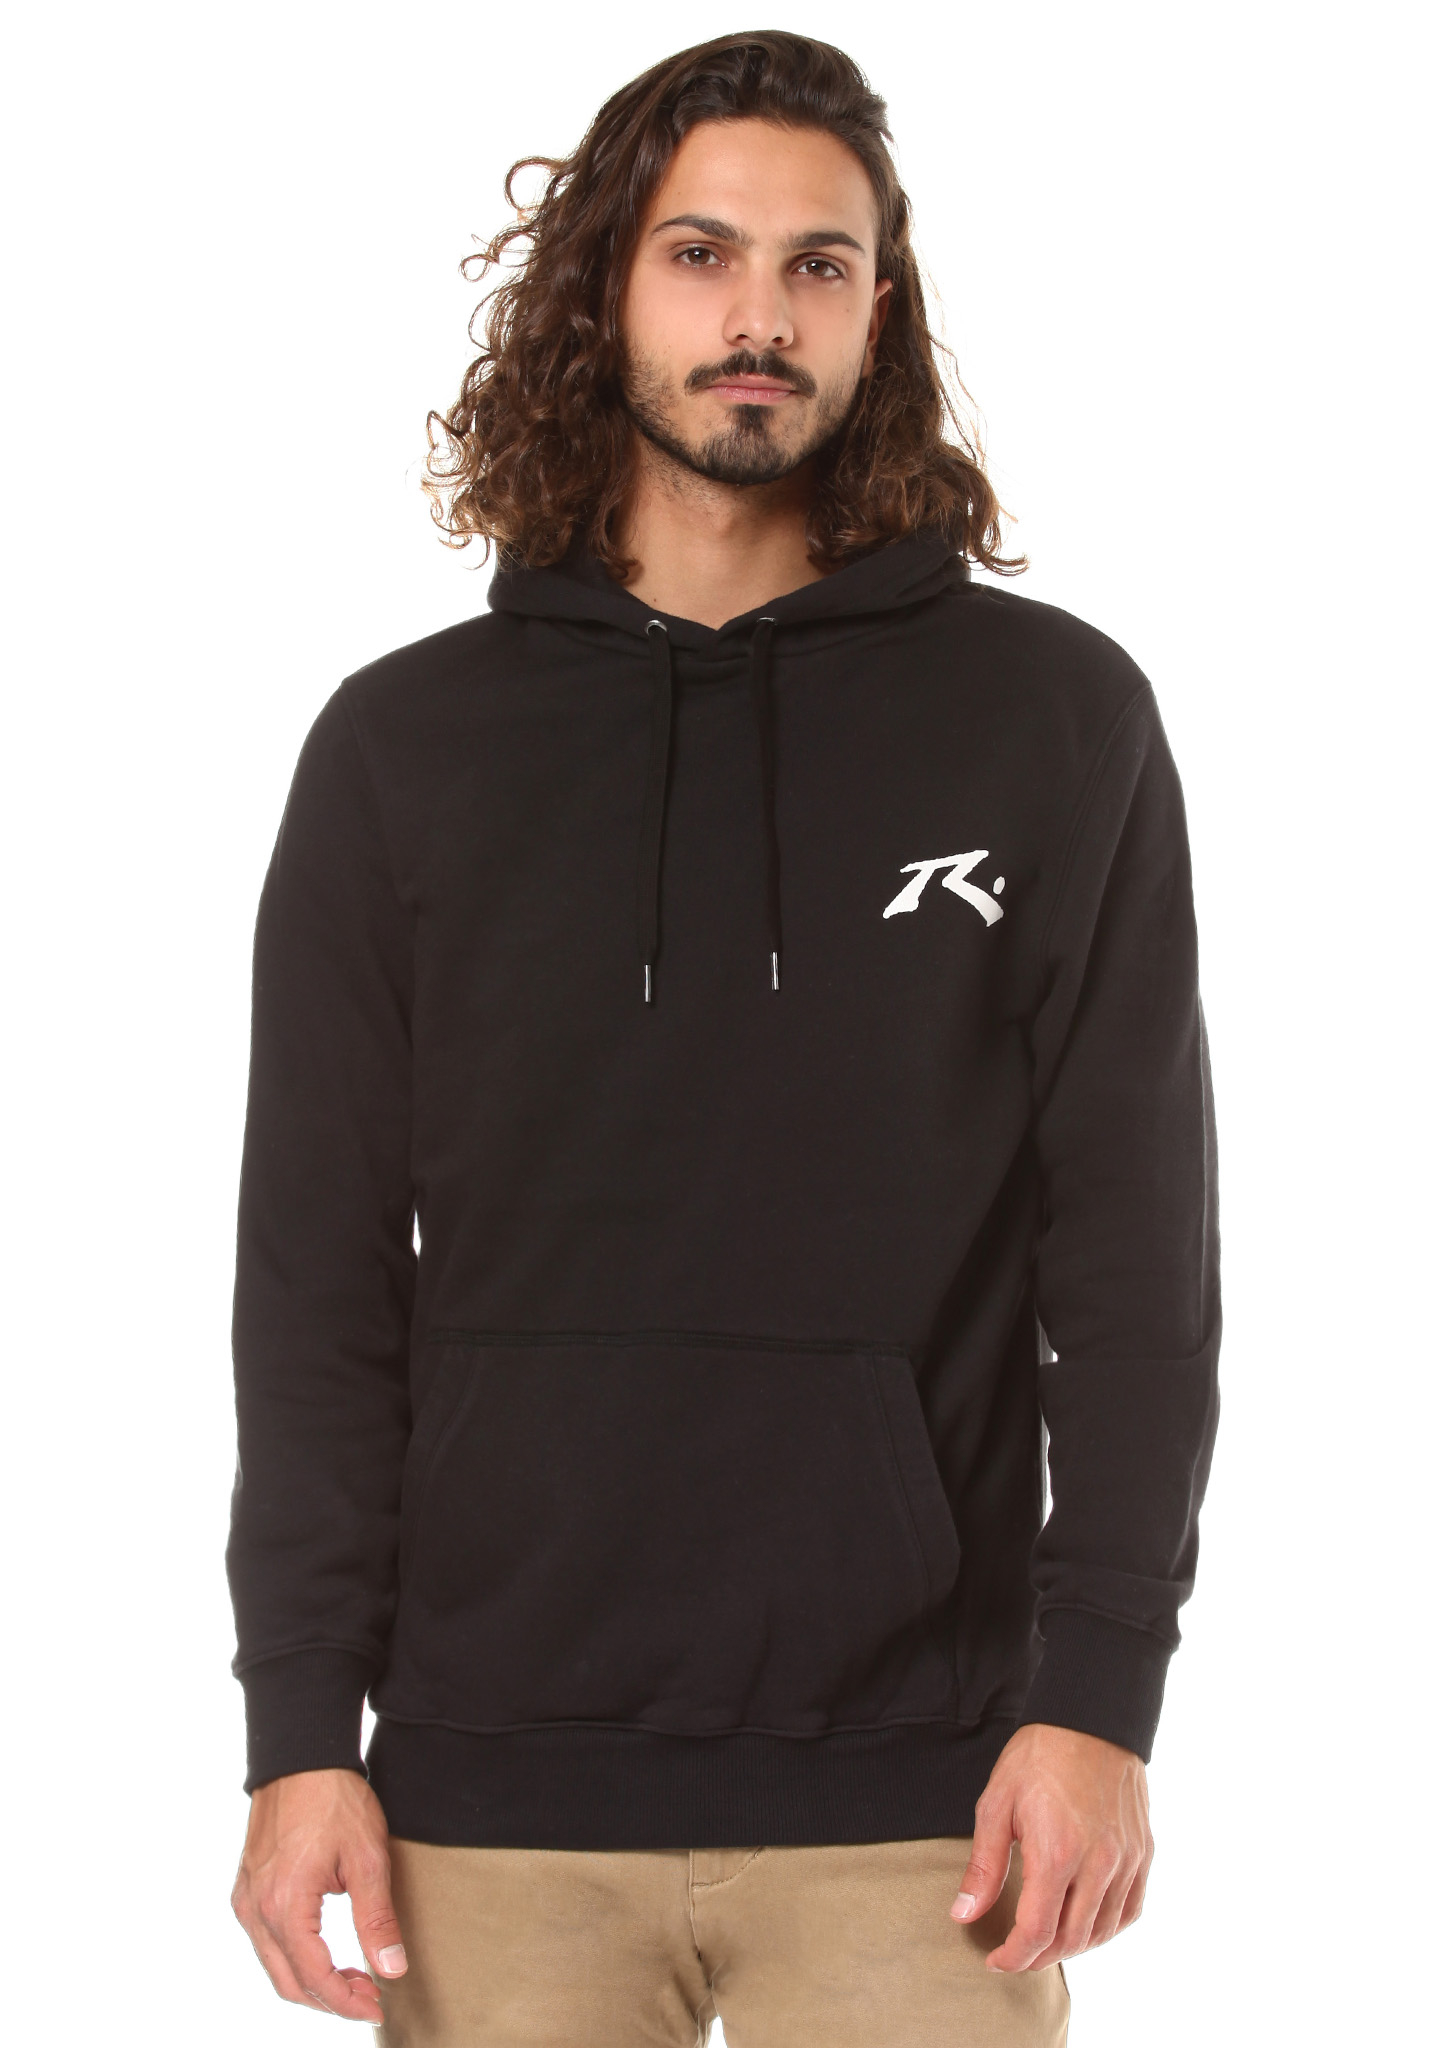 Rusty Competition Hoodie black XL